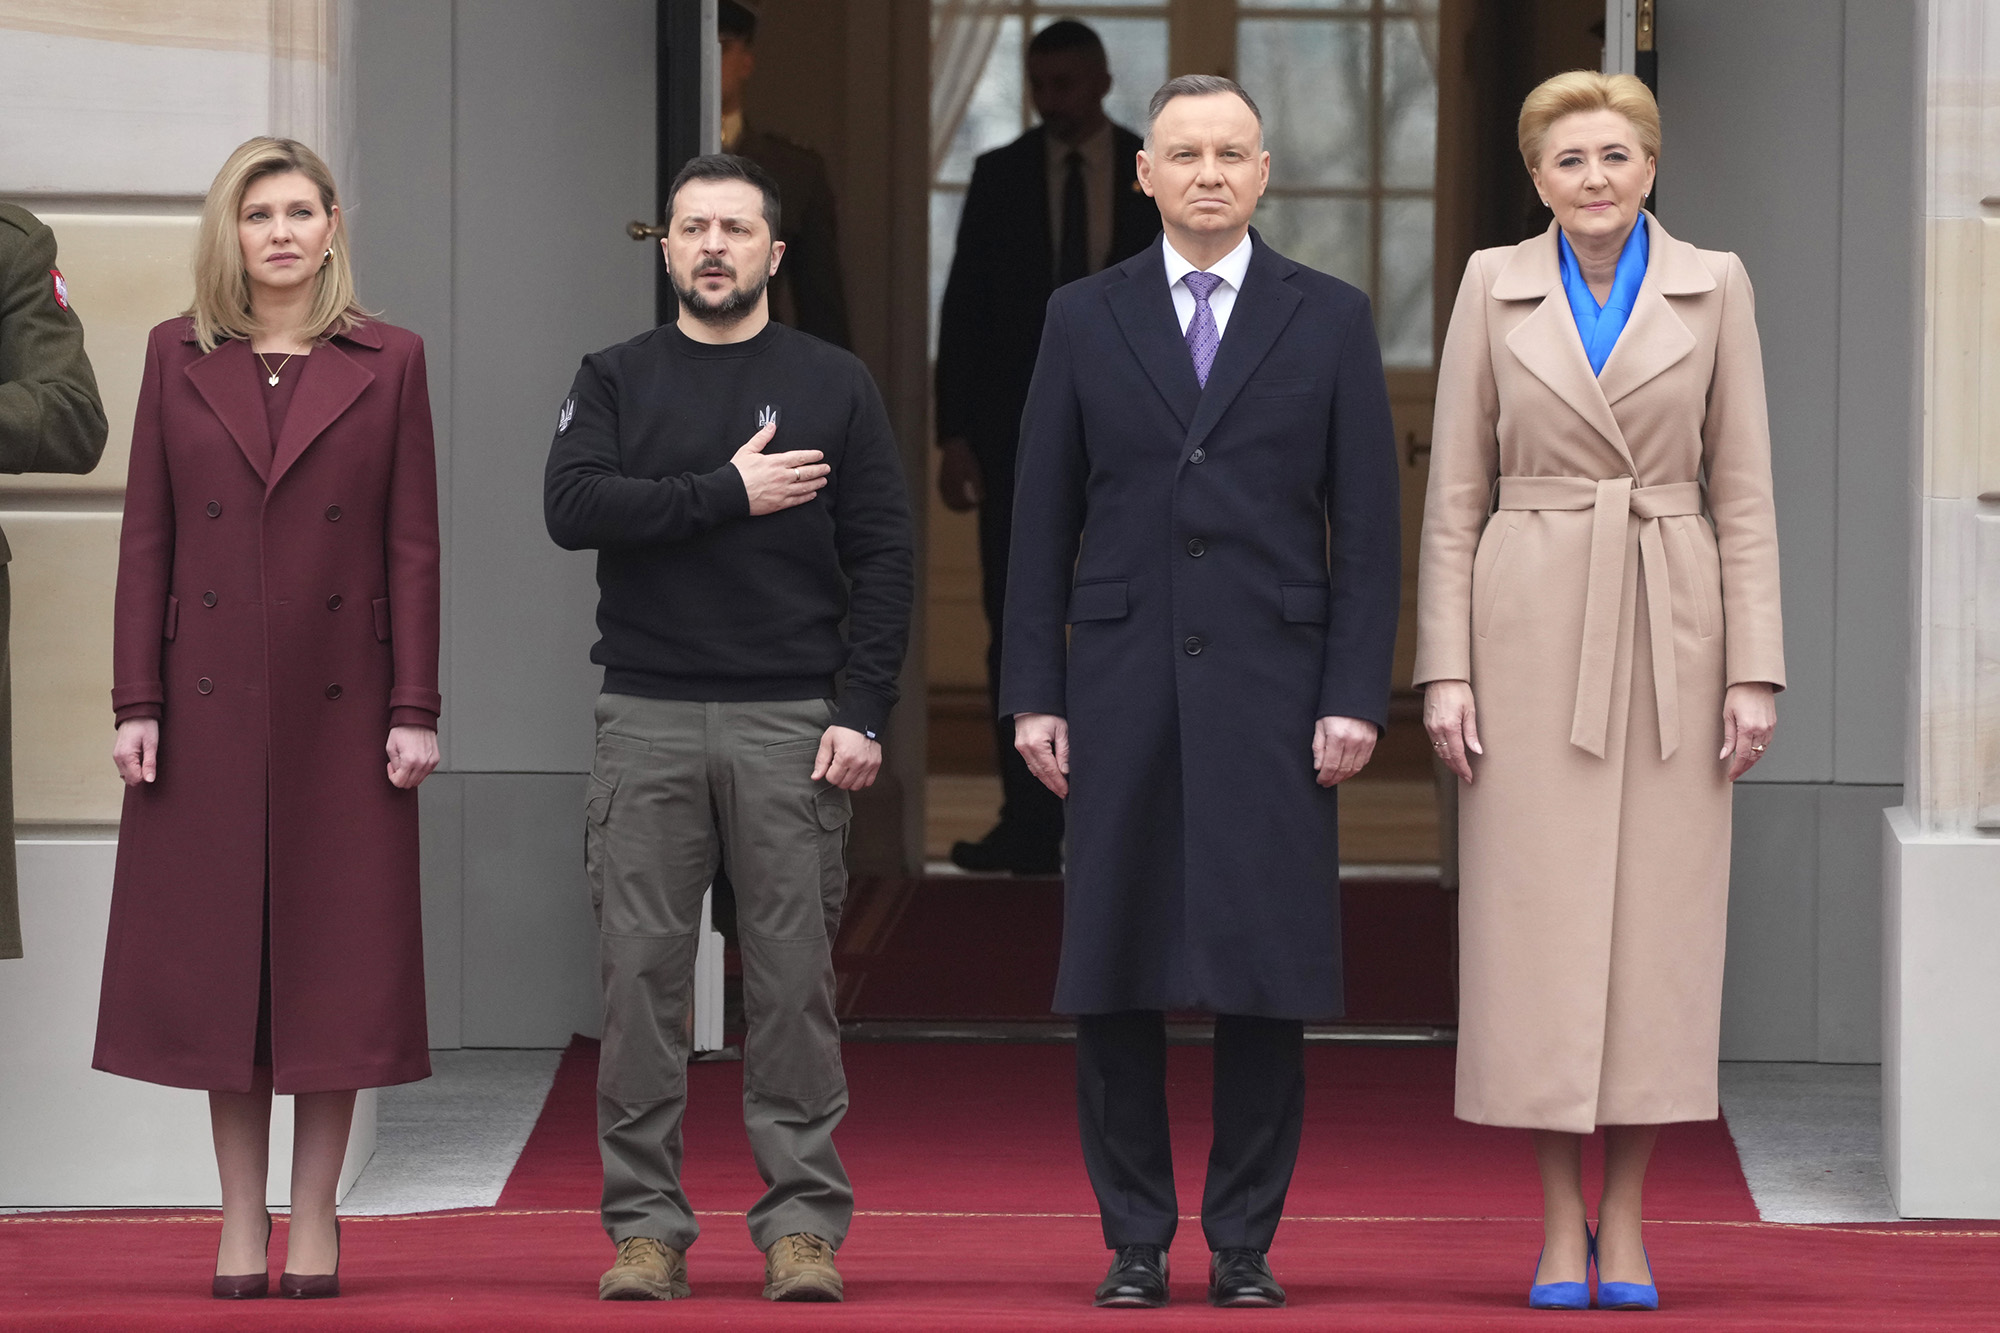 Poland's President Andrzej Duda, second right, with his wife Agata Kornhauser-Duda, right, welcomes Ukrainian President Volodymyr Zelensky, second left, with his wife Olena, left, as they meet at the Presidential Palace in Warsaw, Poland, on April 5.